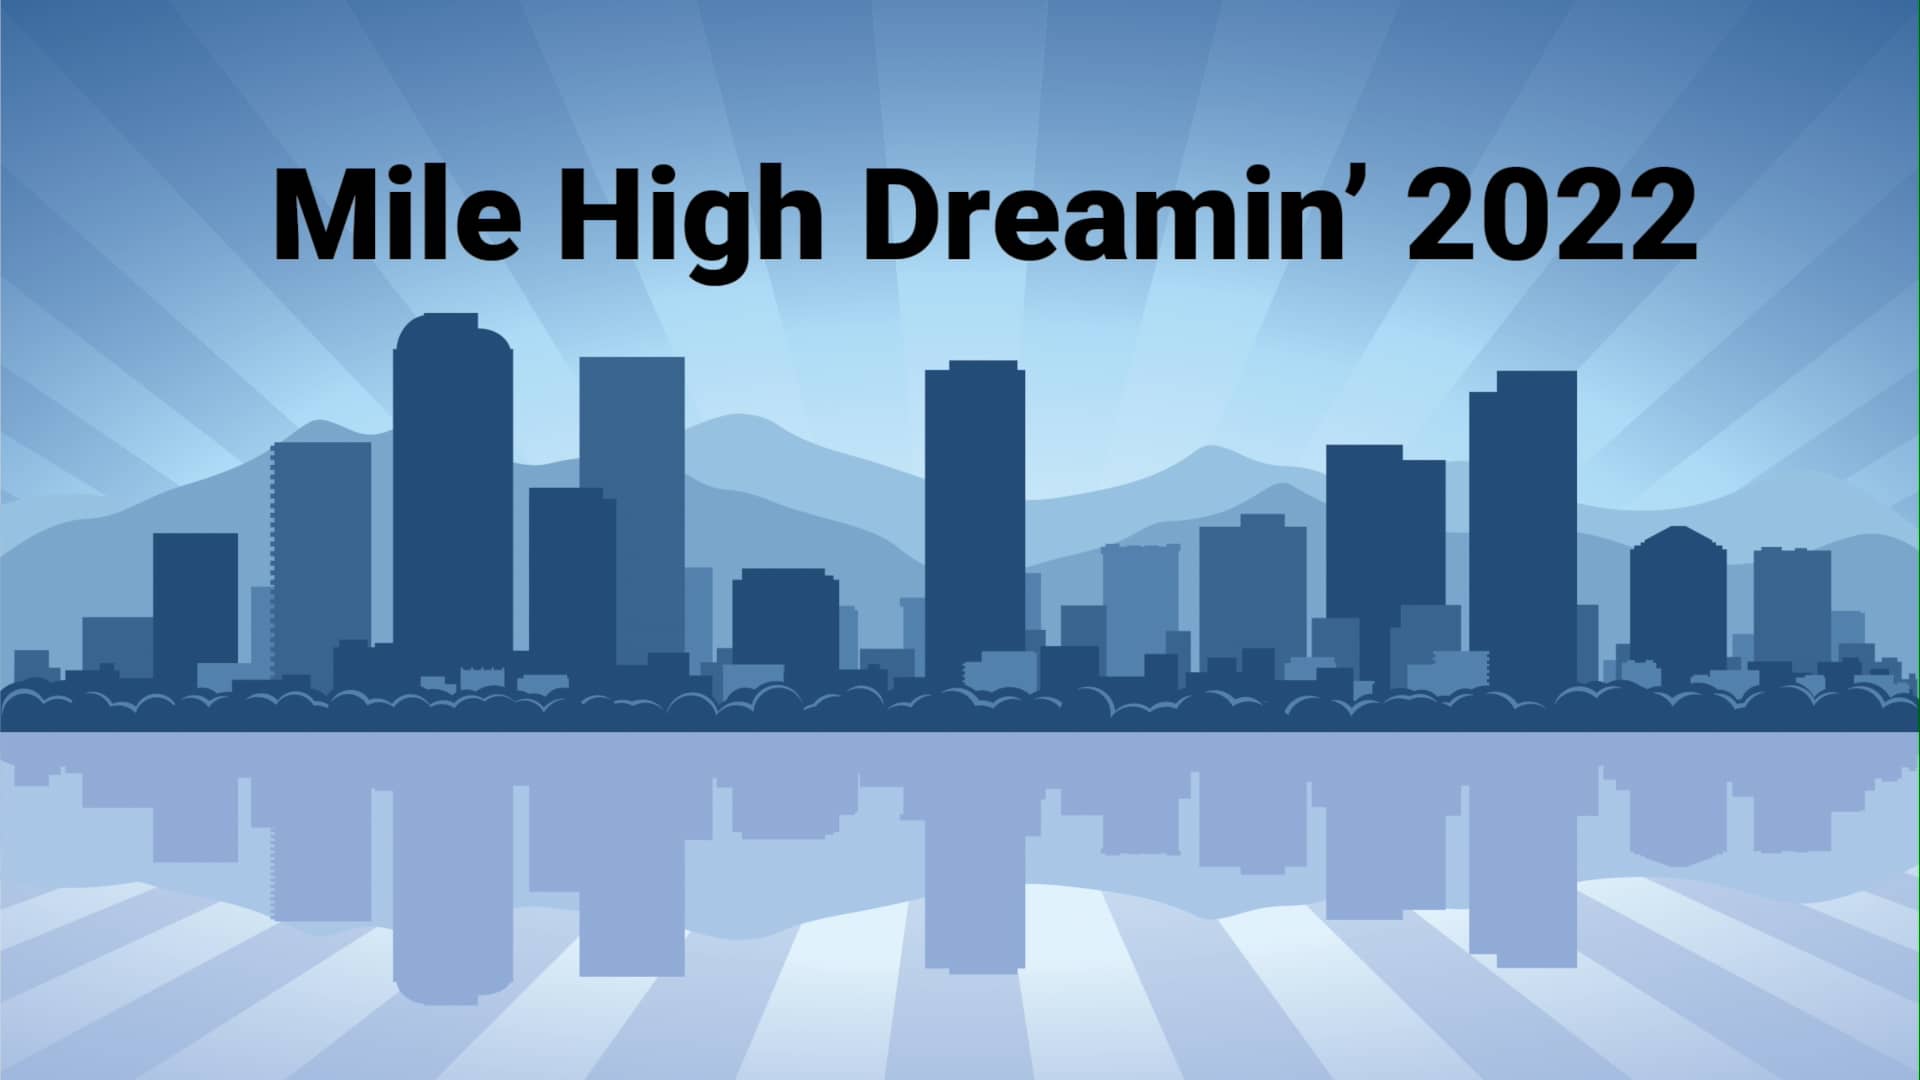 CapStorm at Mile High Dreamin' 2022 on Vimeo